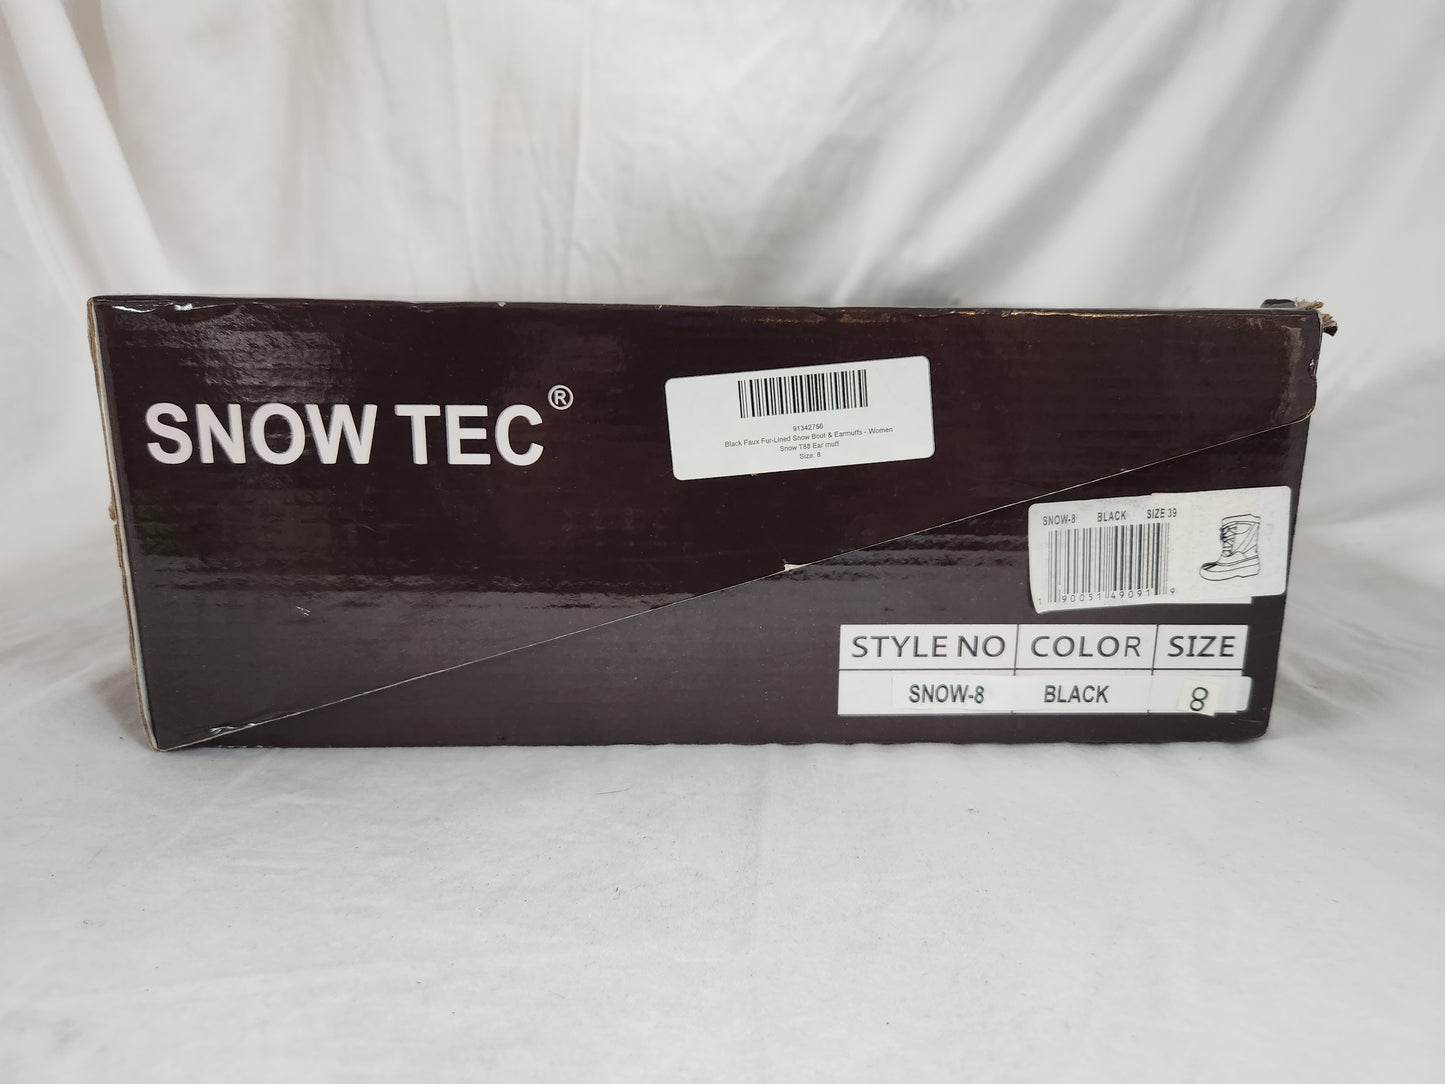 Snow Tec Women's Black Snow-8 Boots with Ear Muffs- Size: 8